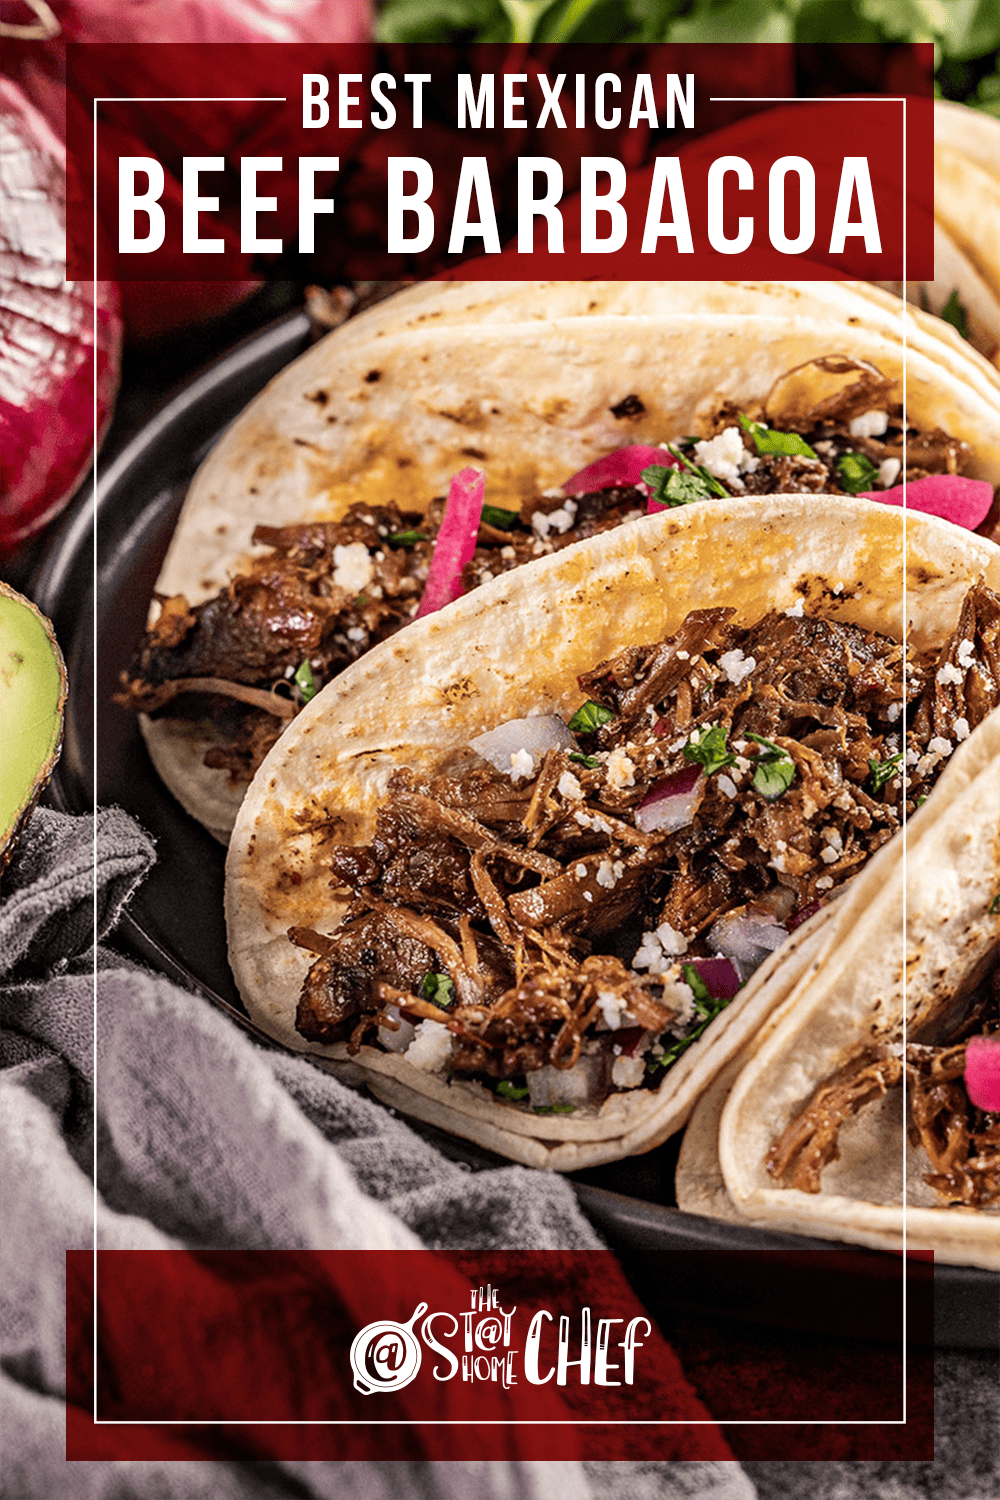 The Best Mexican Beef Barbacoa